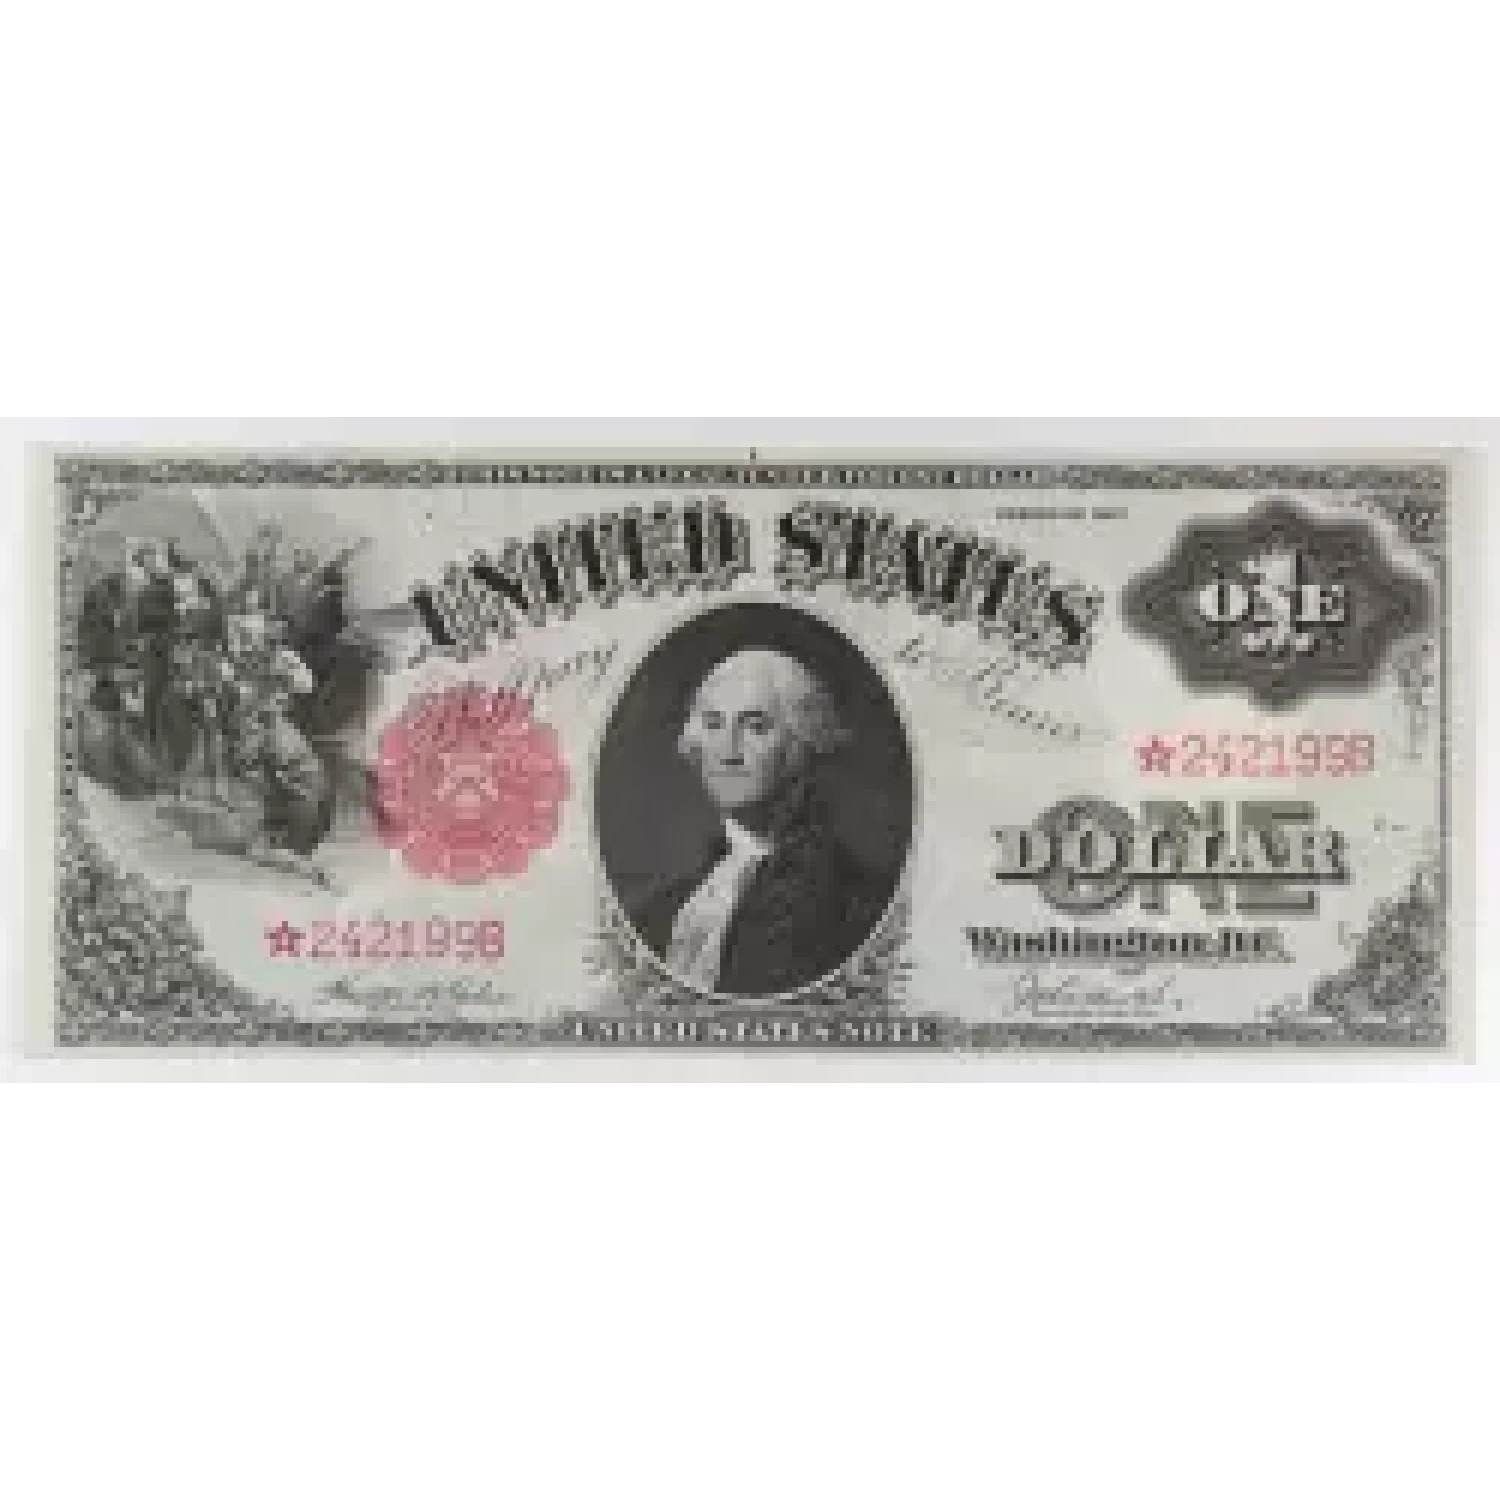 $1 1917 Small Red, scalloped Legal Tender Issues 36*